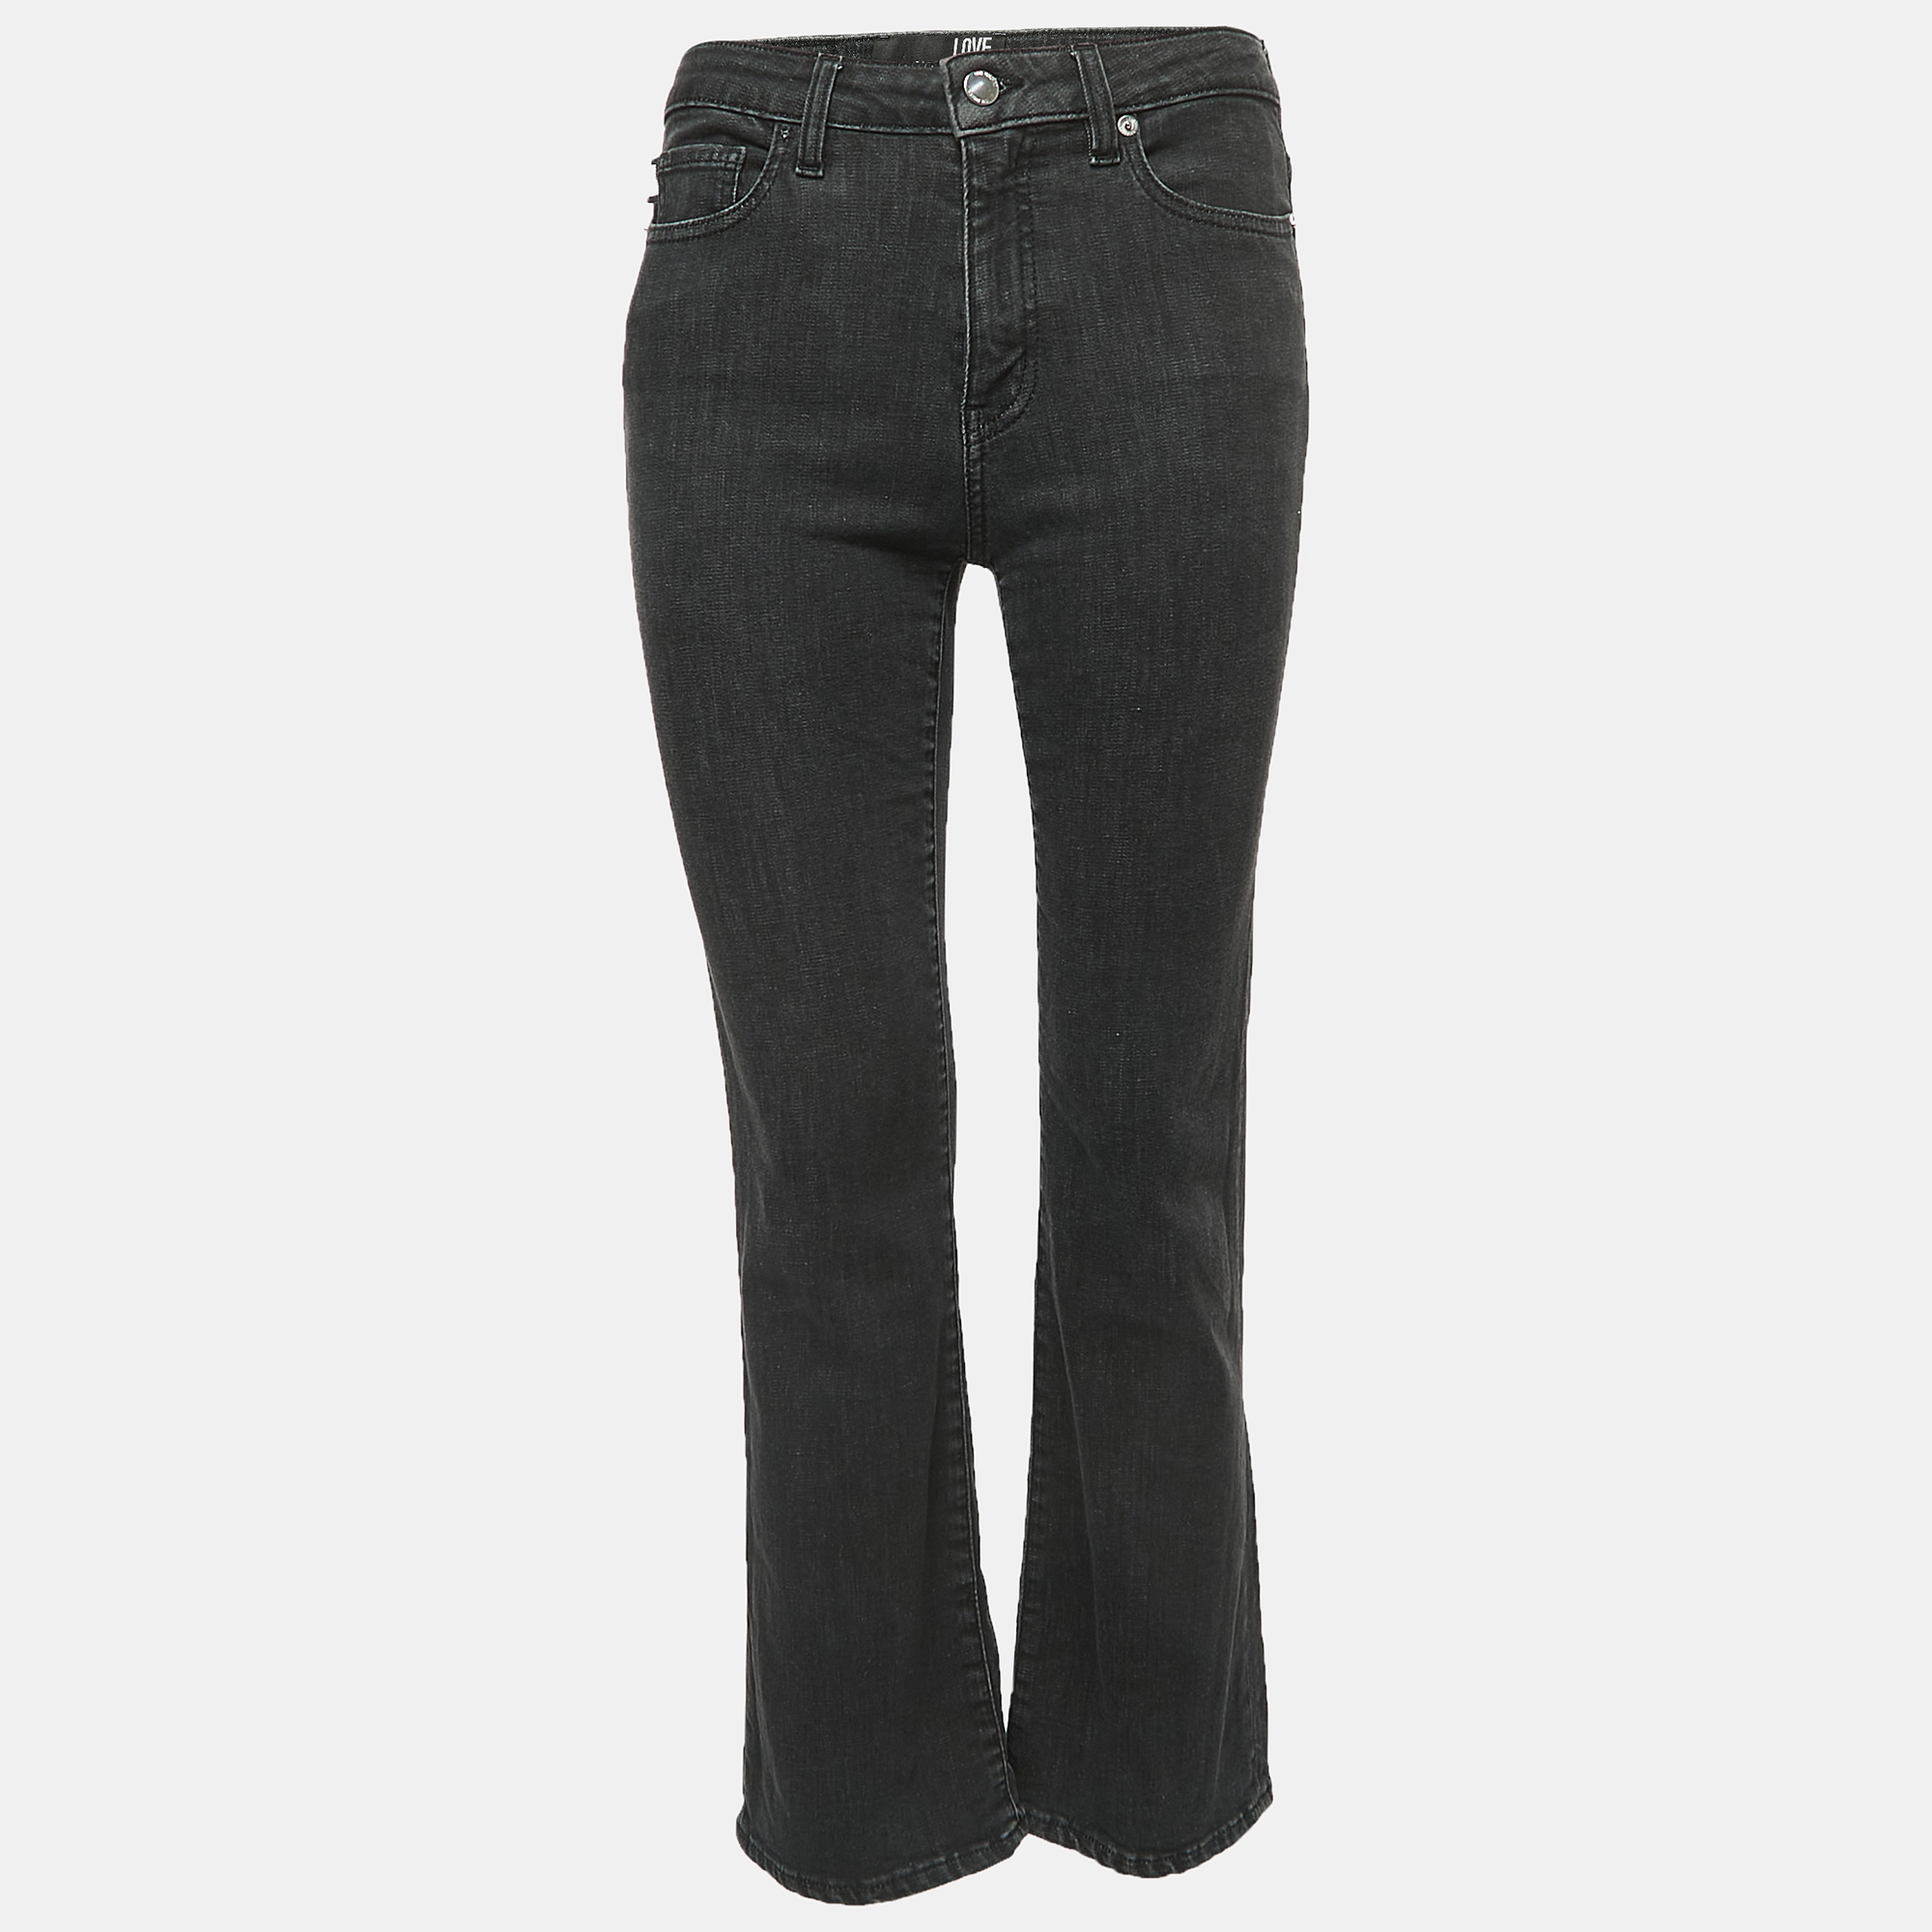 Love Moschino Black Washed Denim Cropped Jeans S Waist 27